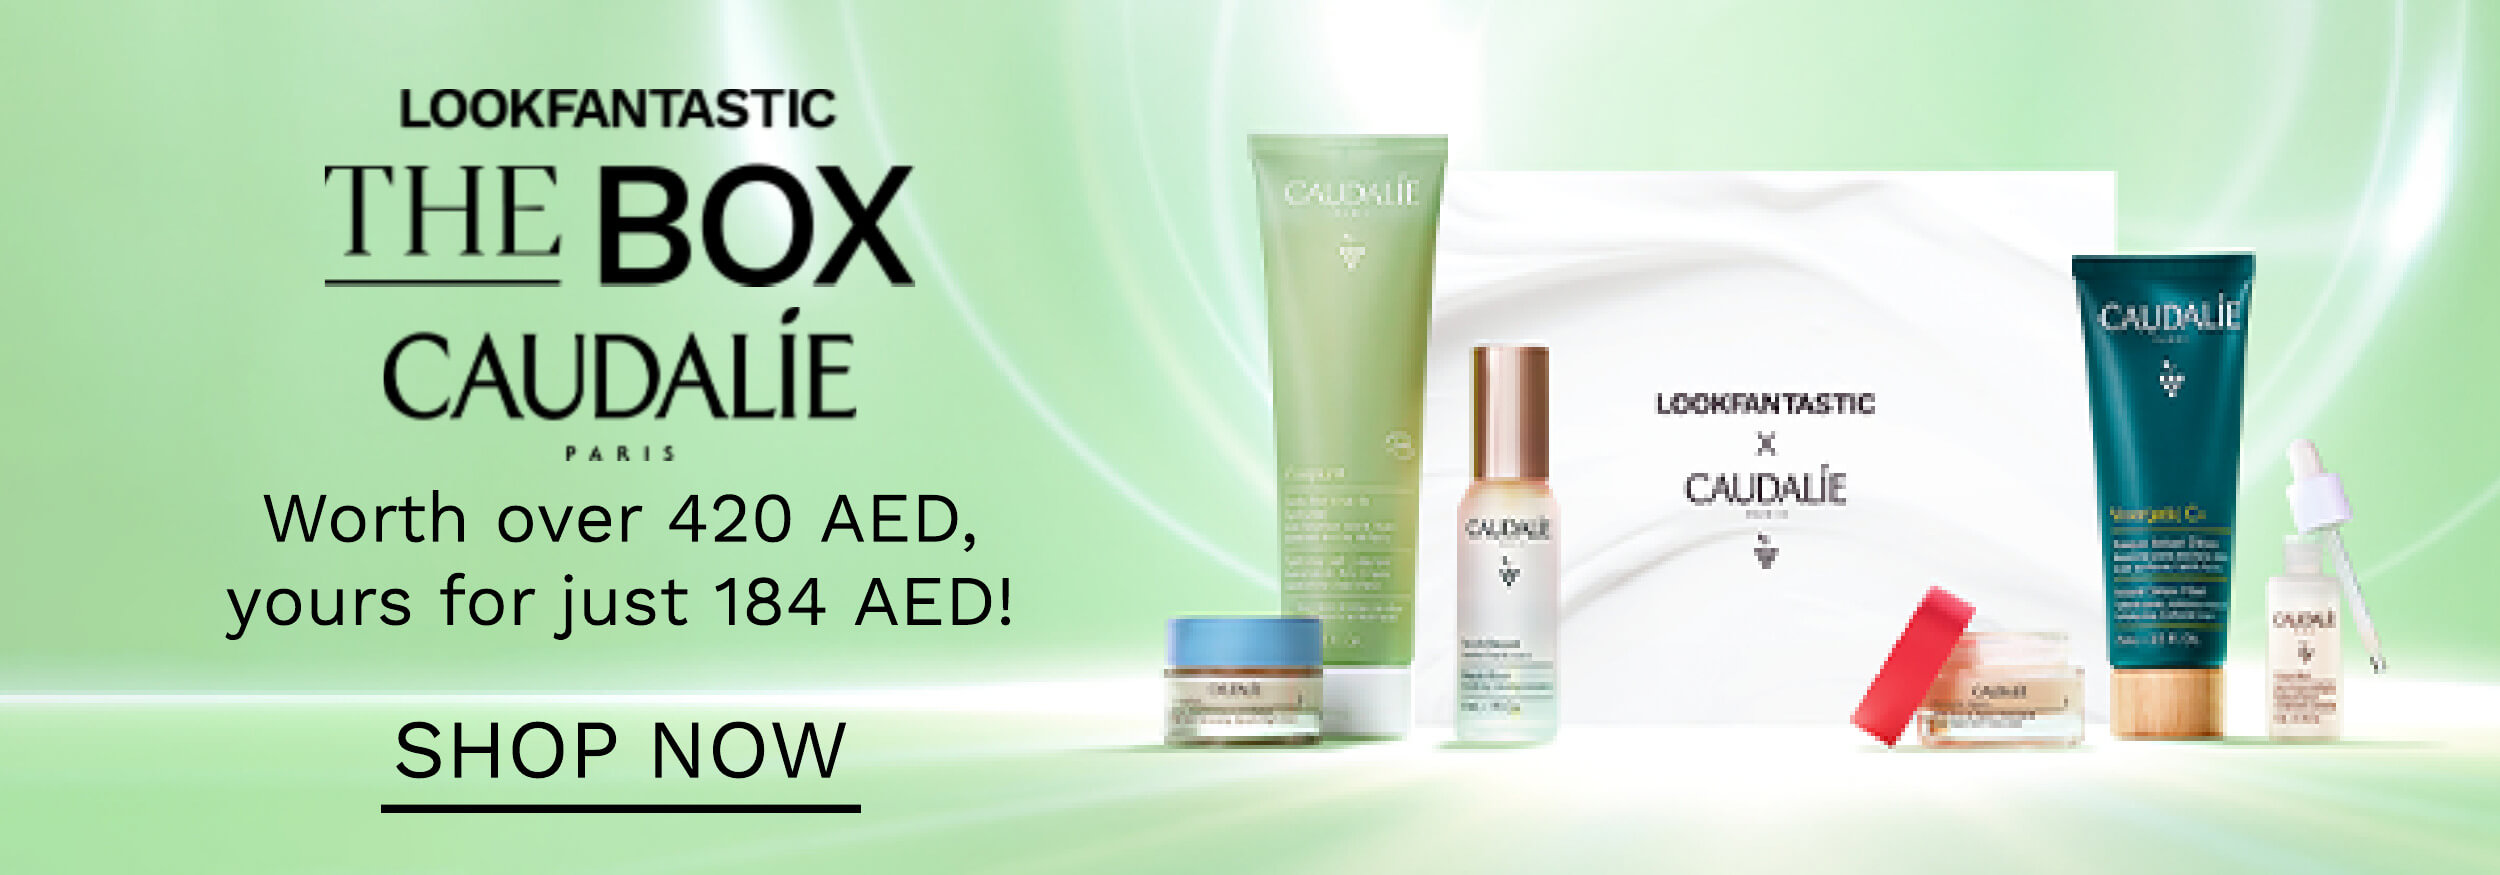 LOOKFANTASTIC THE BOX CAUDALIE PPPPP Worth over 420 AED, yours for just 184 AED! SHOP NOW 